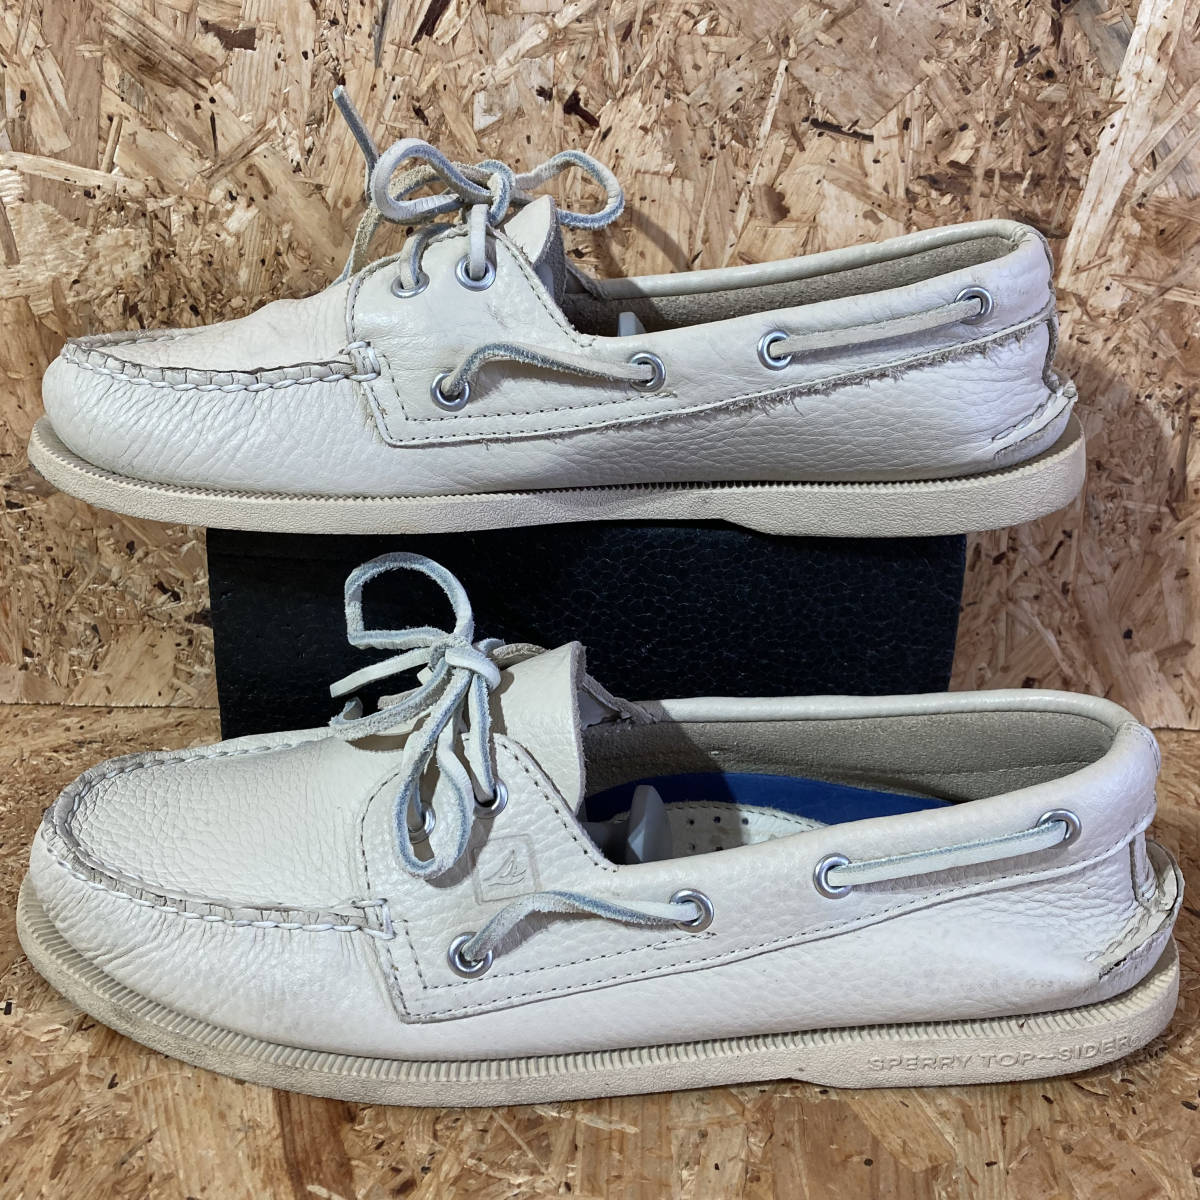 SPERRY TOP SIDER deck shoes US9s Perry верх носорог da-